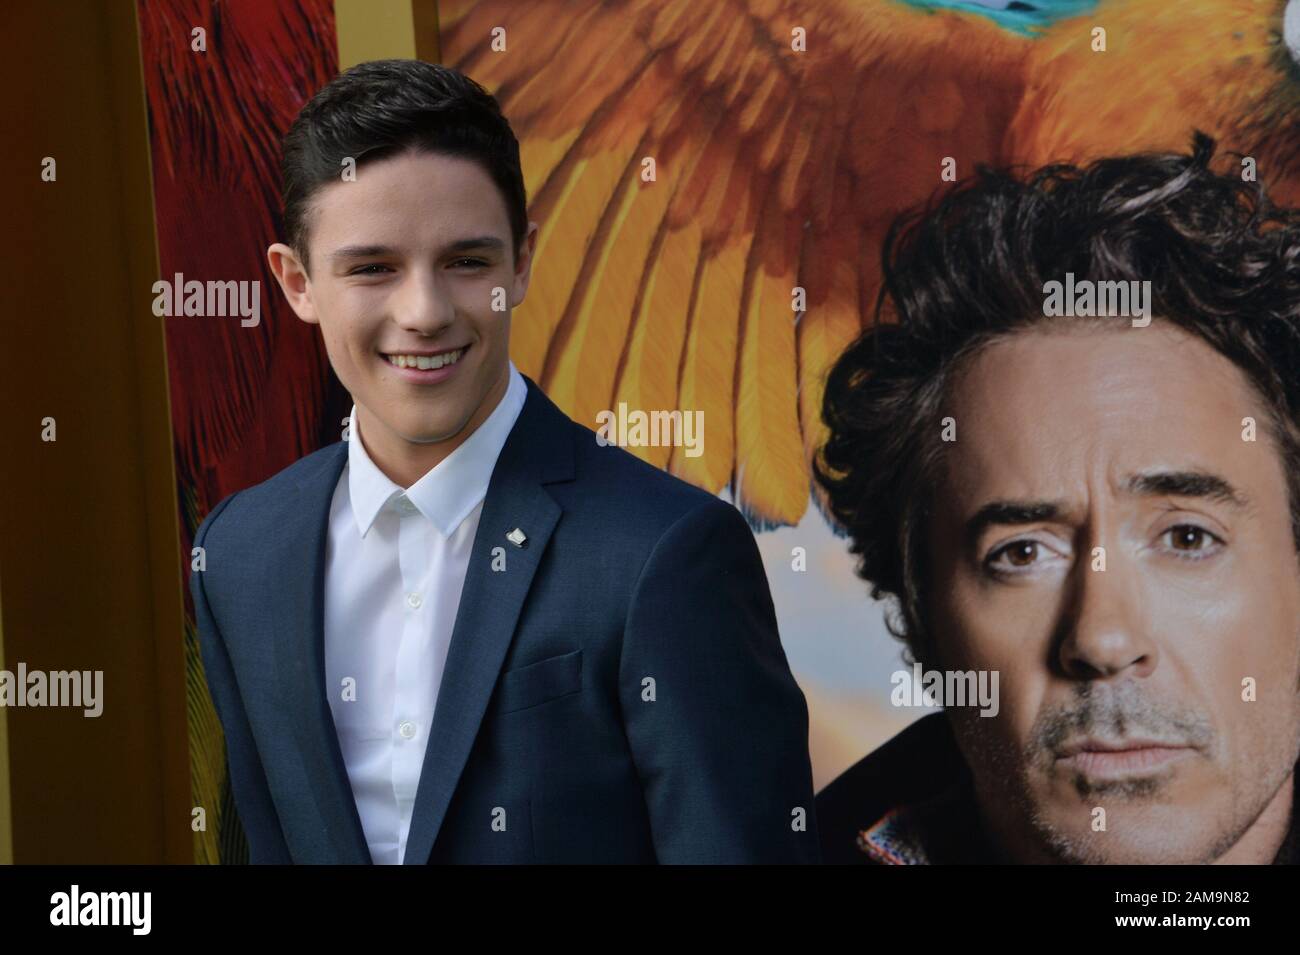 Los Angeles, United States. 12th Jan, 2020. Cast member Harry Collett attends the premiere of the motion picture comedy 'Dolittle' at the Regency Village Theatre in the Westwood section of Los Angeles on Saturday, January 11, 2020. Storyline: A physician discovers that he can talk to animals. Photo by Jim Ruymen/UPI. Credit: UPI/Alamy Live News Stock Photo